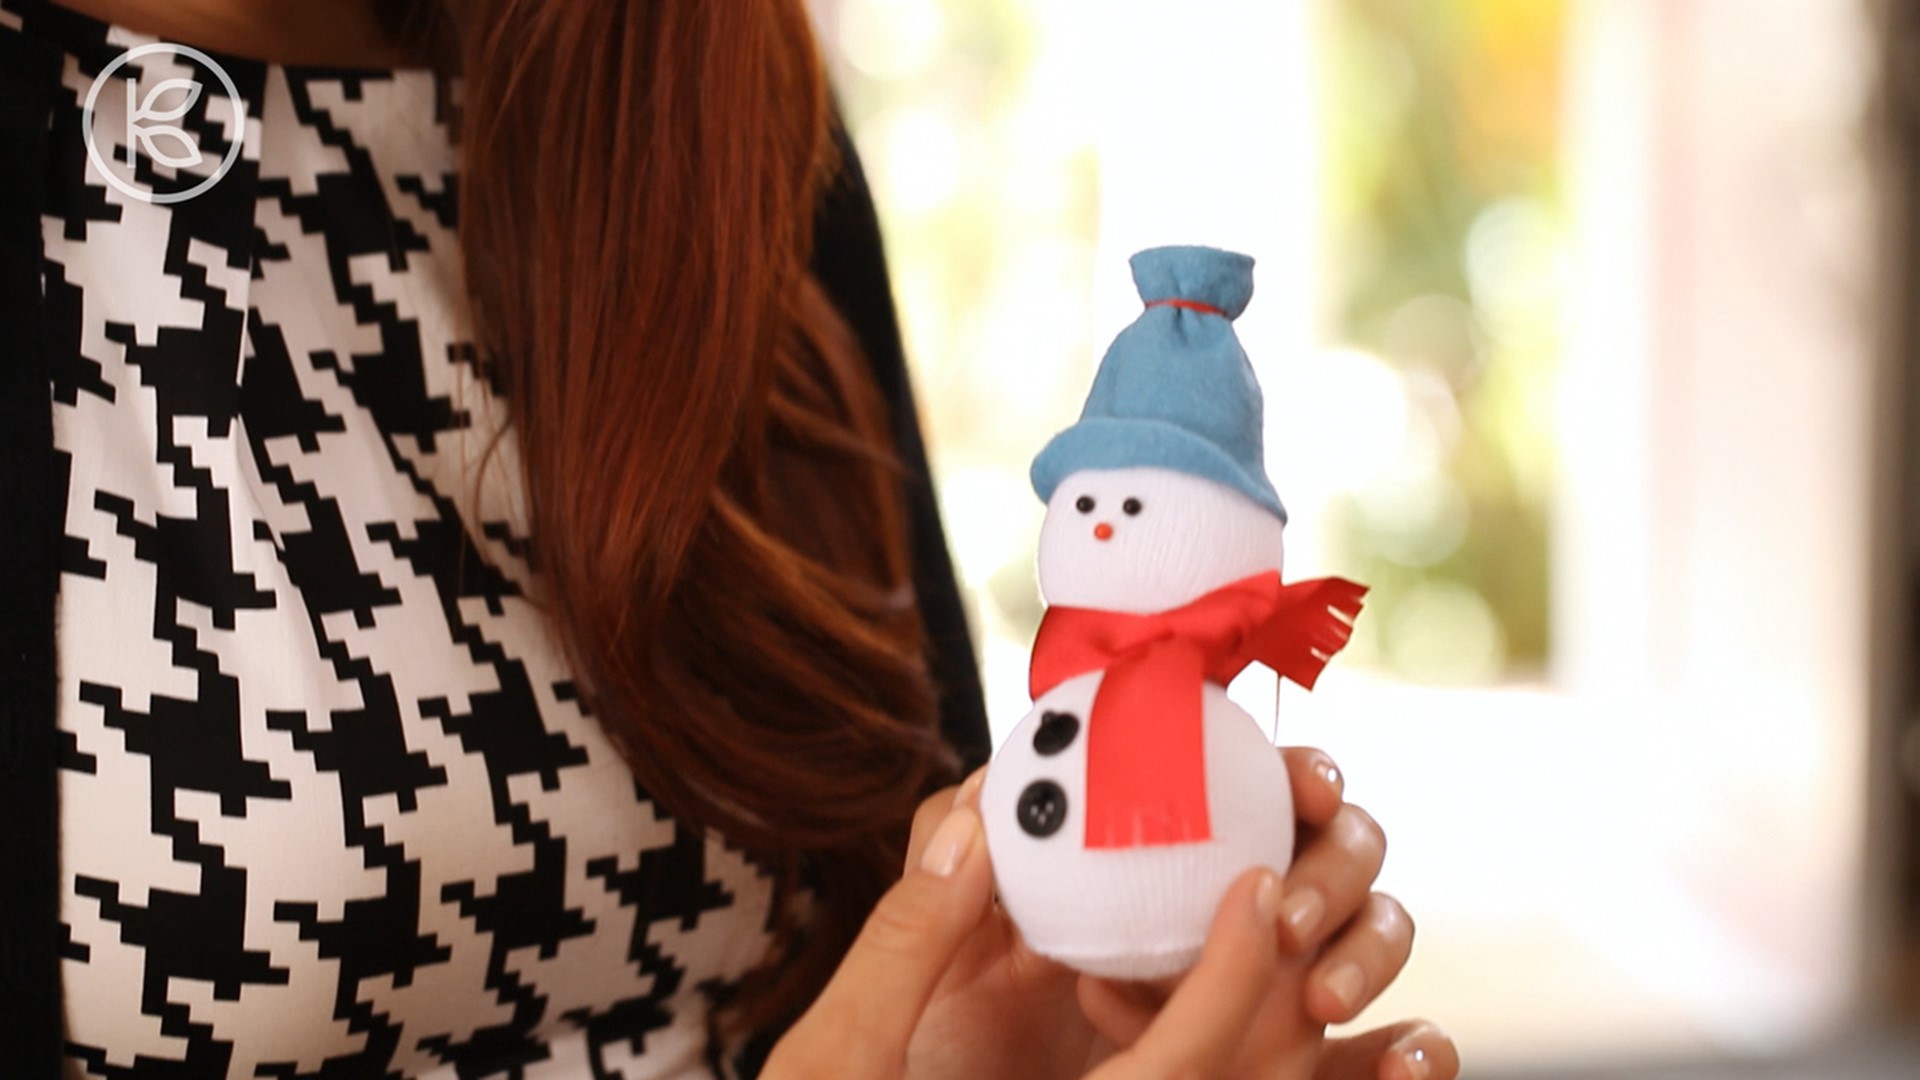 Want to make some snowmen without snow? Take a look at our nifty guide on creating this cute creation.